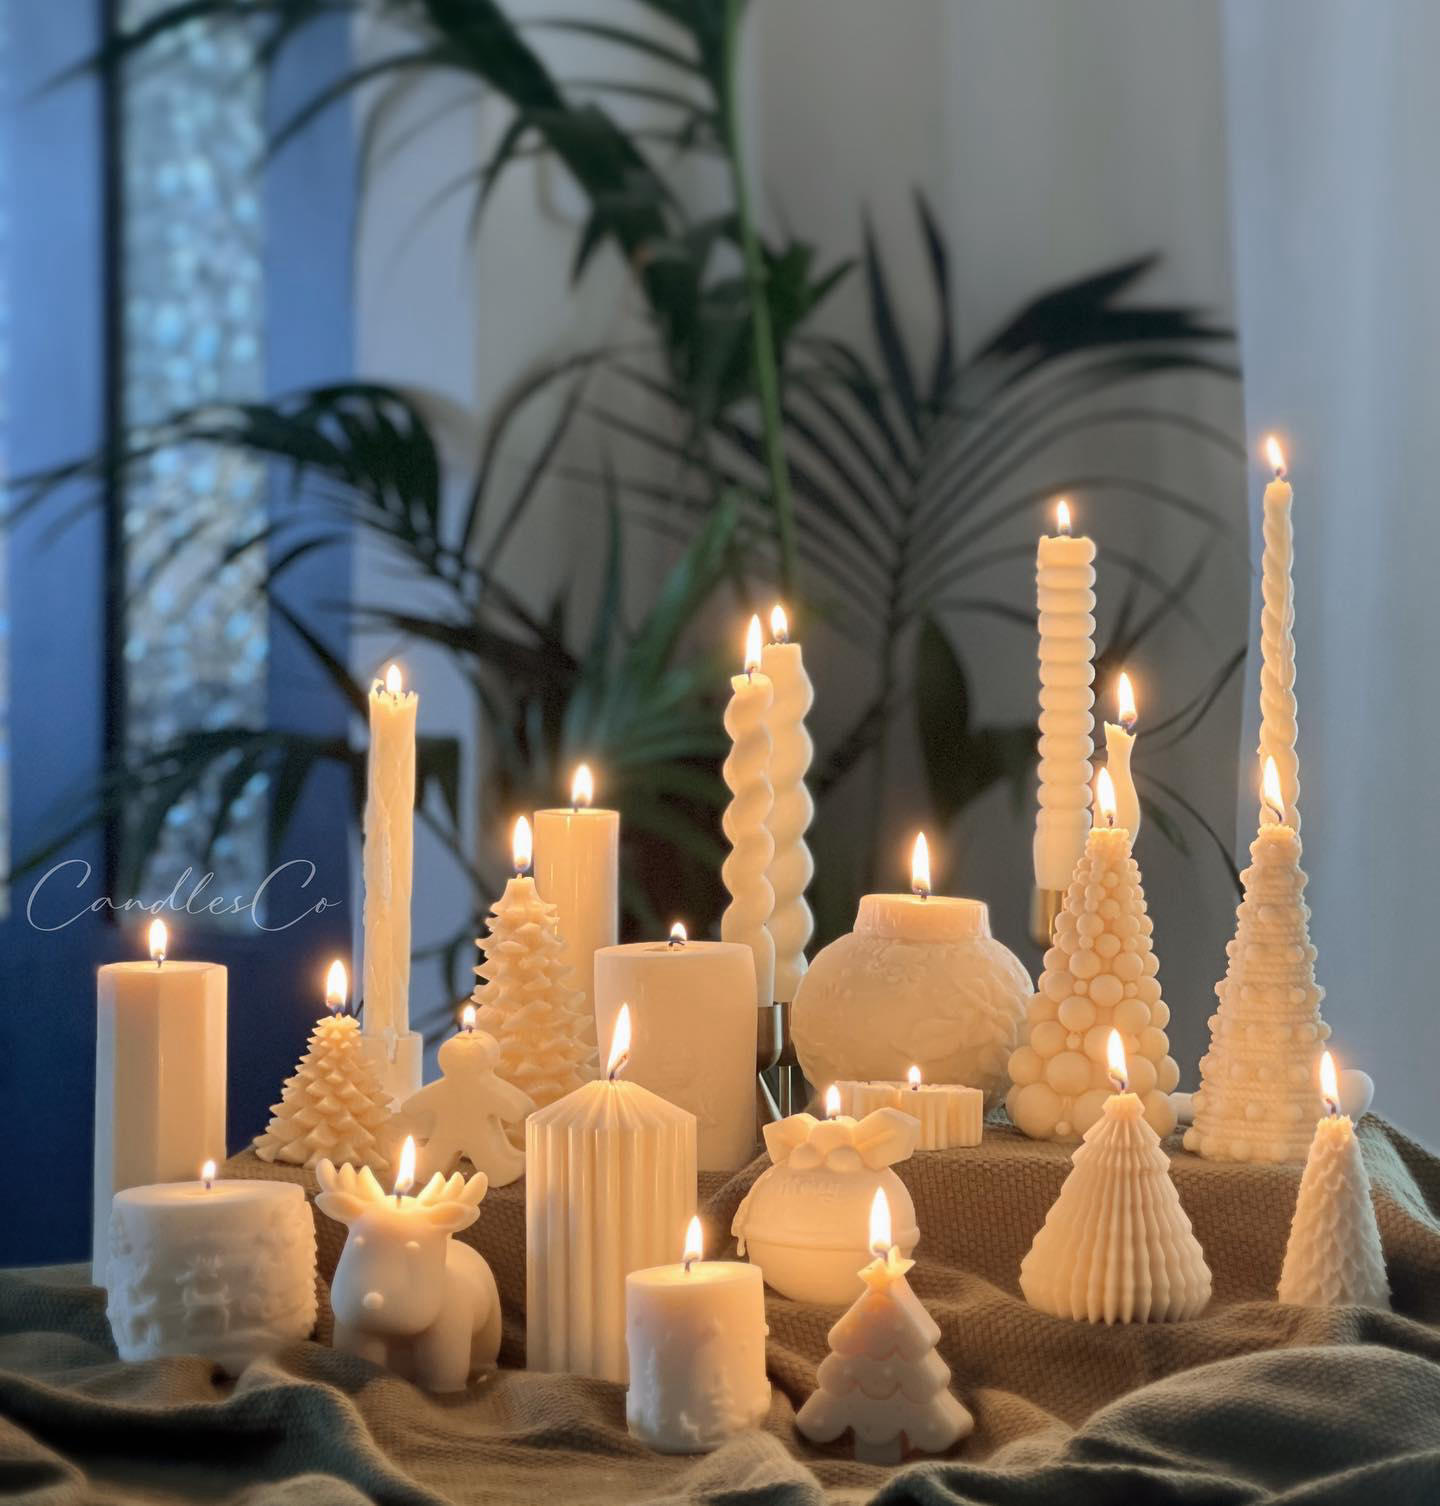 CandlesCo Australia - Merry Christmas from our family to your